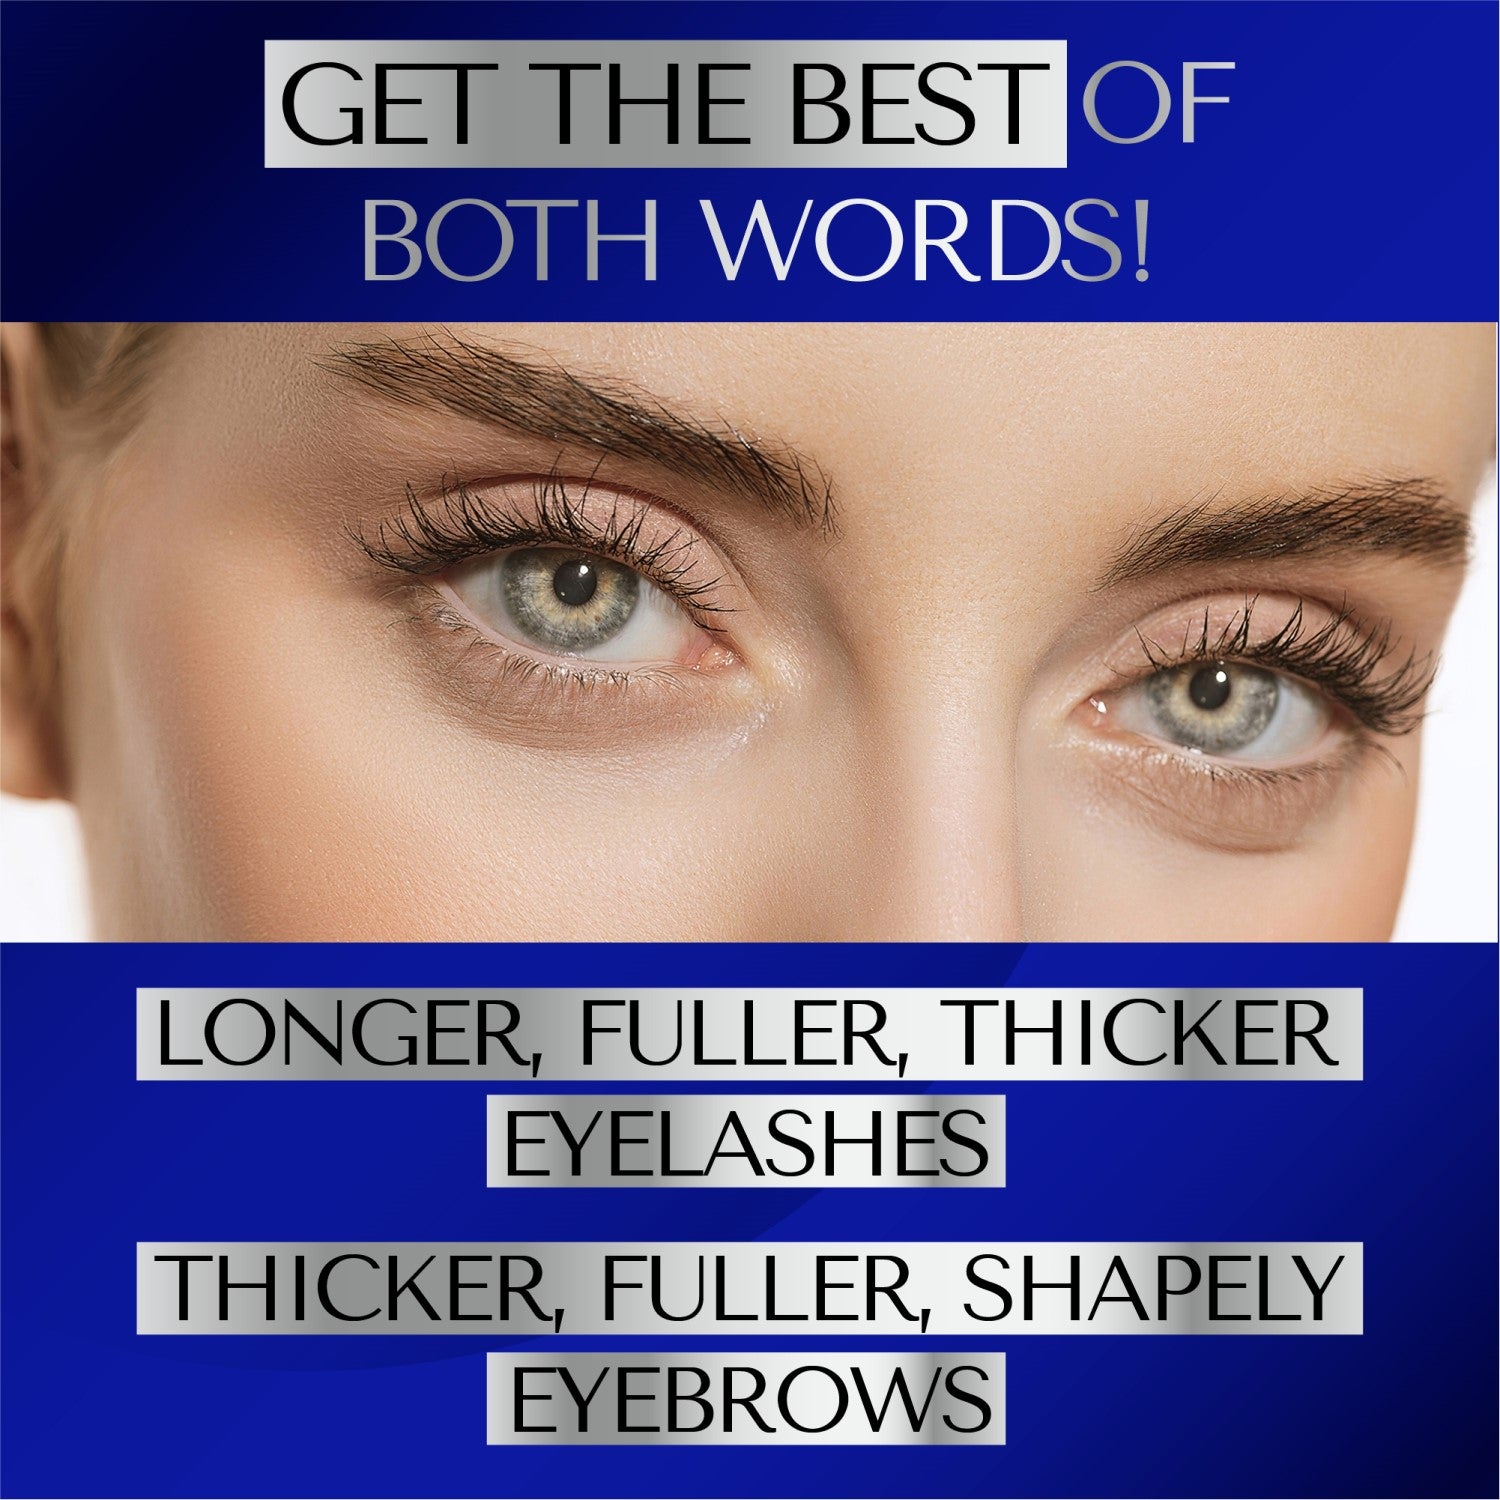 Grow longer, fuller, thicker eyelashes and thicker, fuller, shapely eyebrows with Dermaworks rapid lash and brow serums.